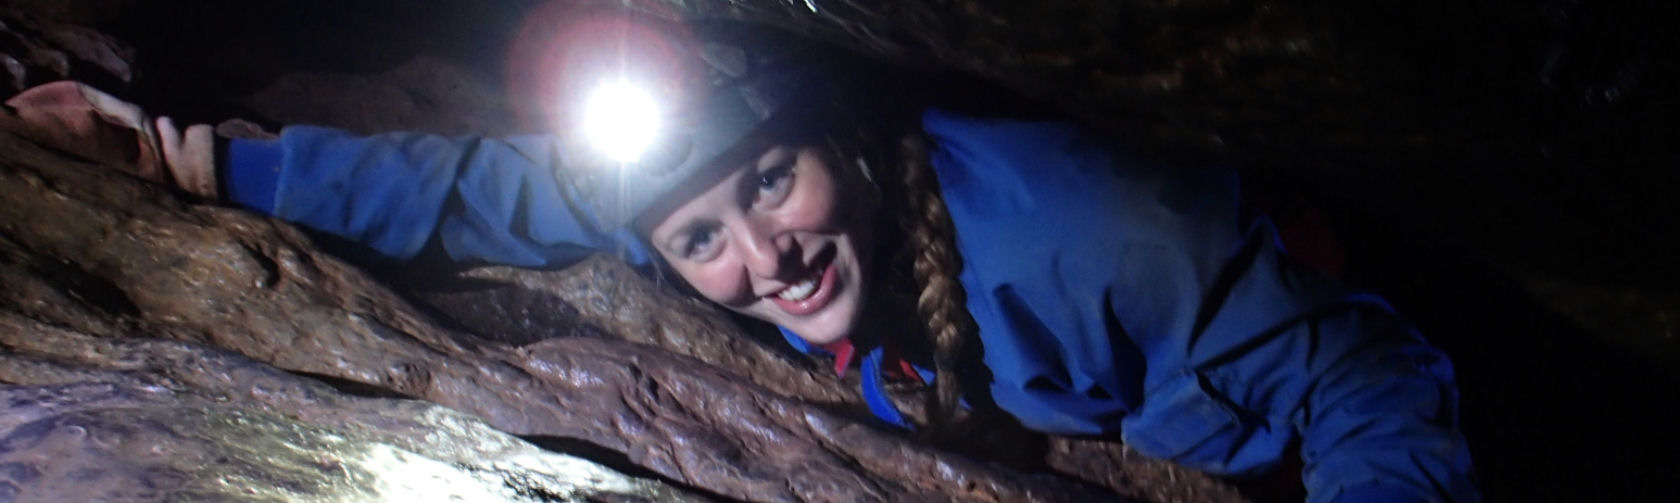 x-treme Adventure Caving in Cheddar Somerset